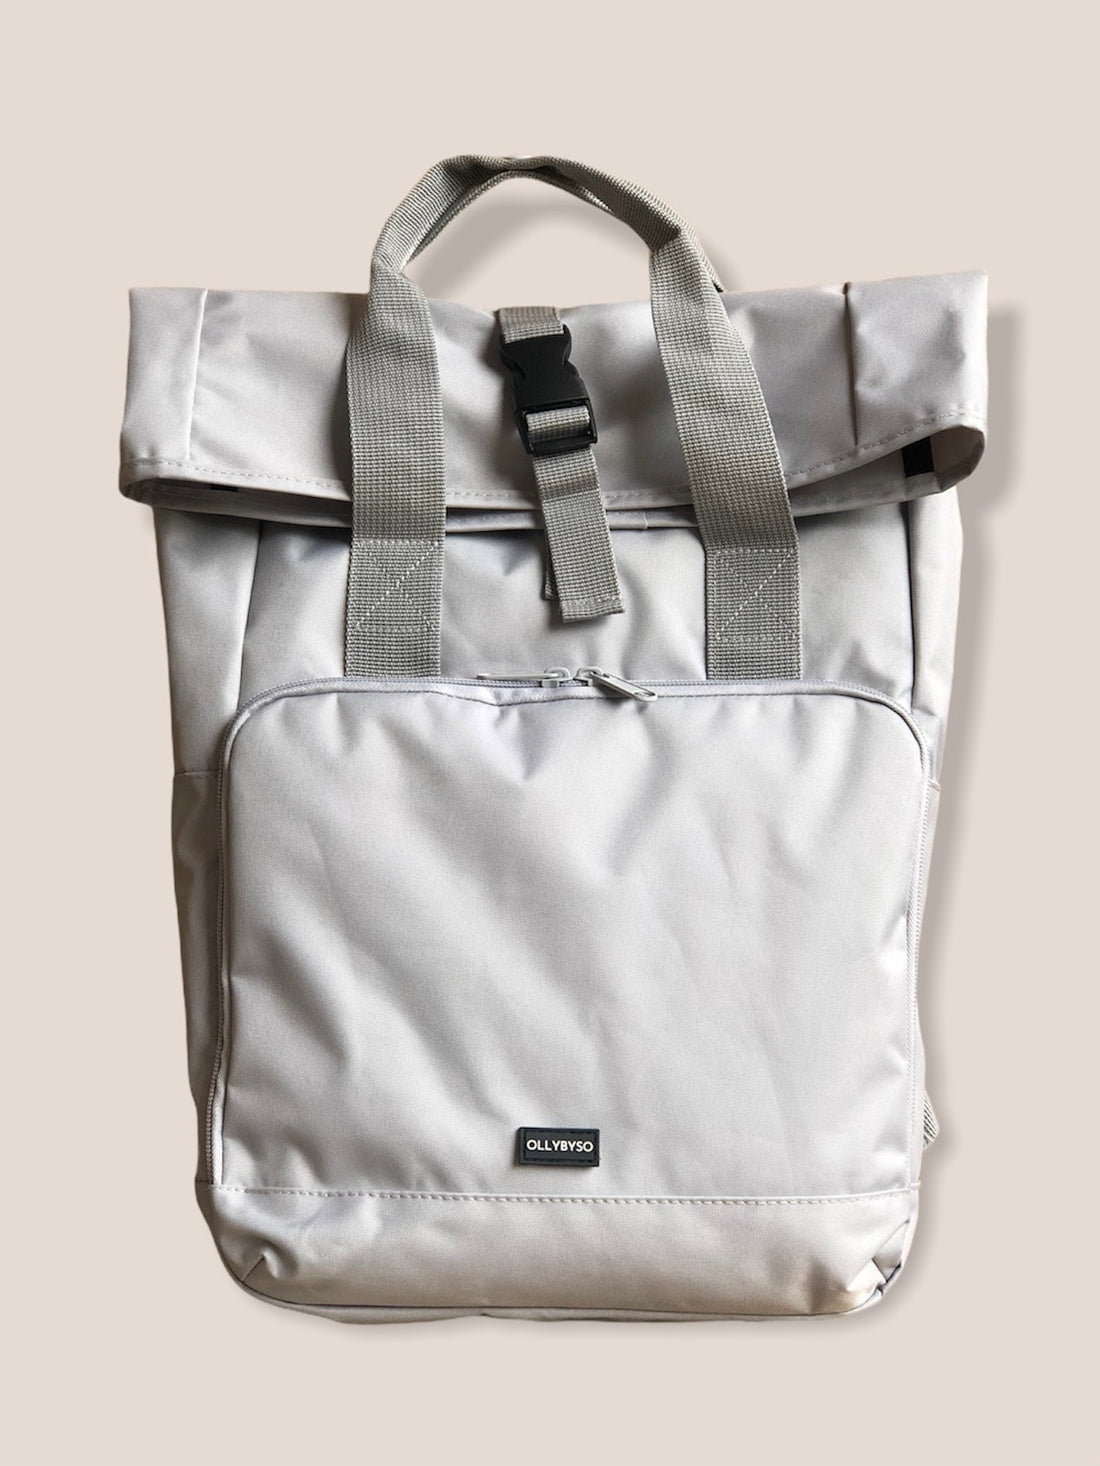 Backpack 0.1 - Grey Walking Accessories | Travel Luggage – OLLYBYSO